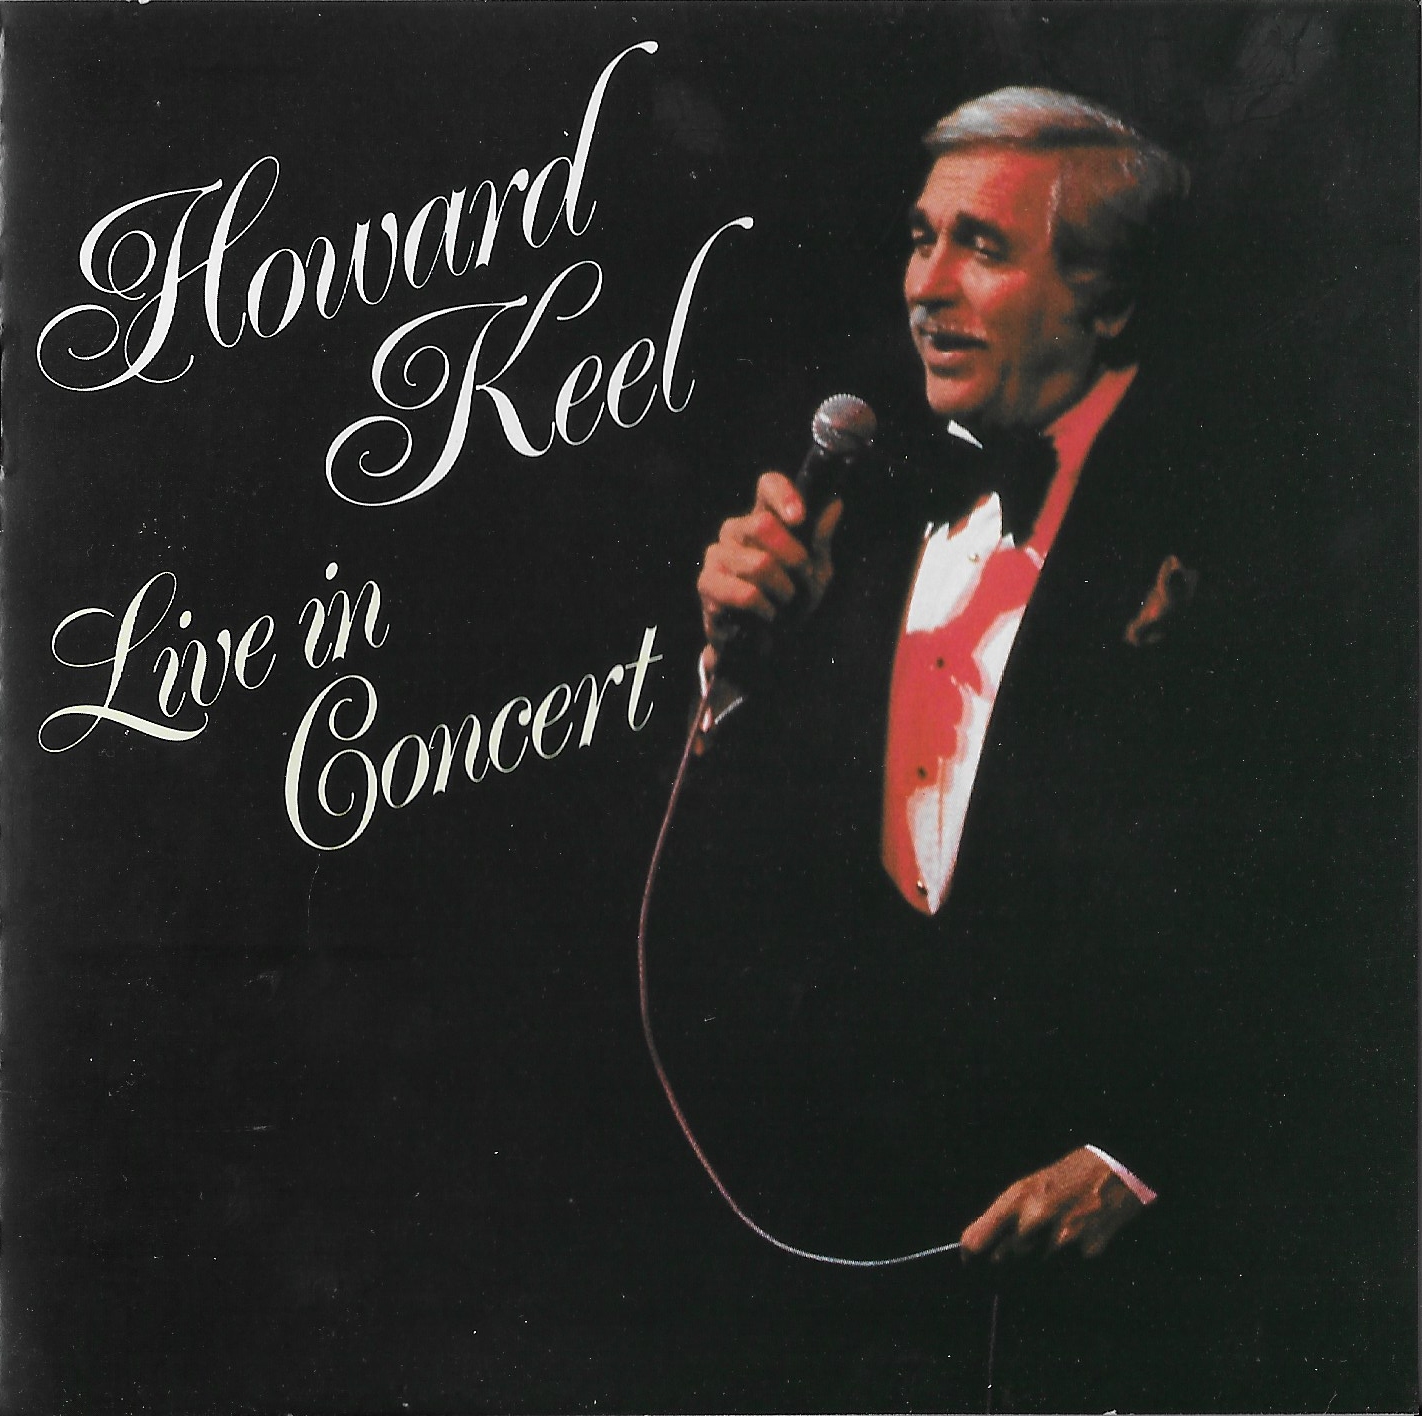 Picture of BBCCD2005 Howard Keel - live in concert by artist Howard Keel from the BBC cds - Records and Tapes library